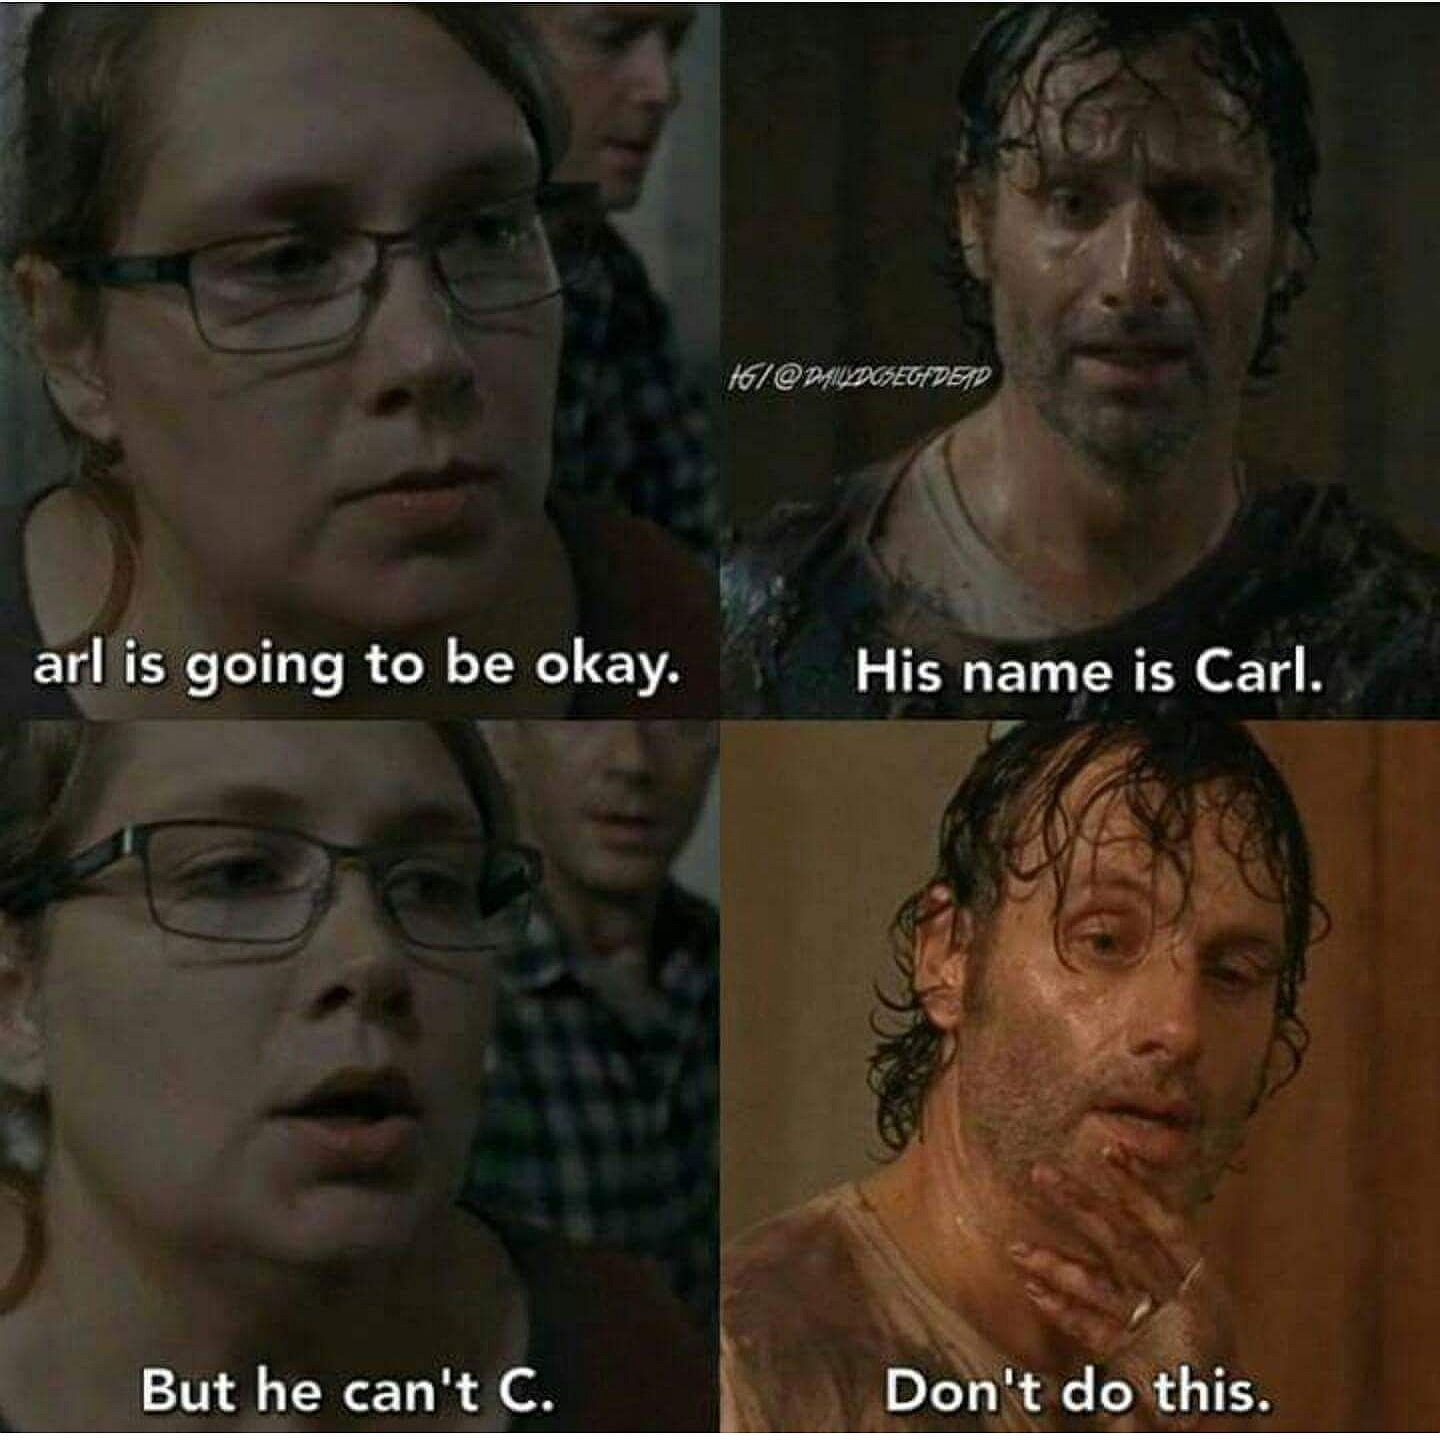 Another "TWD" Dad Humor example.